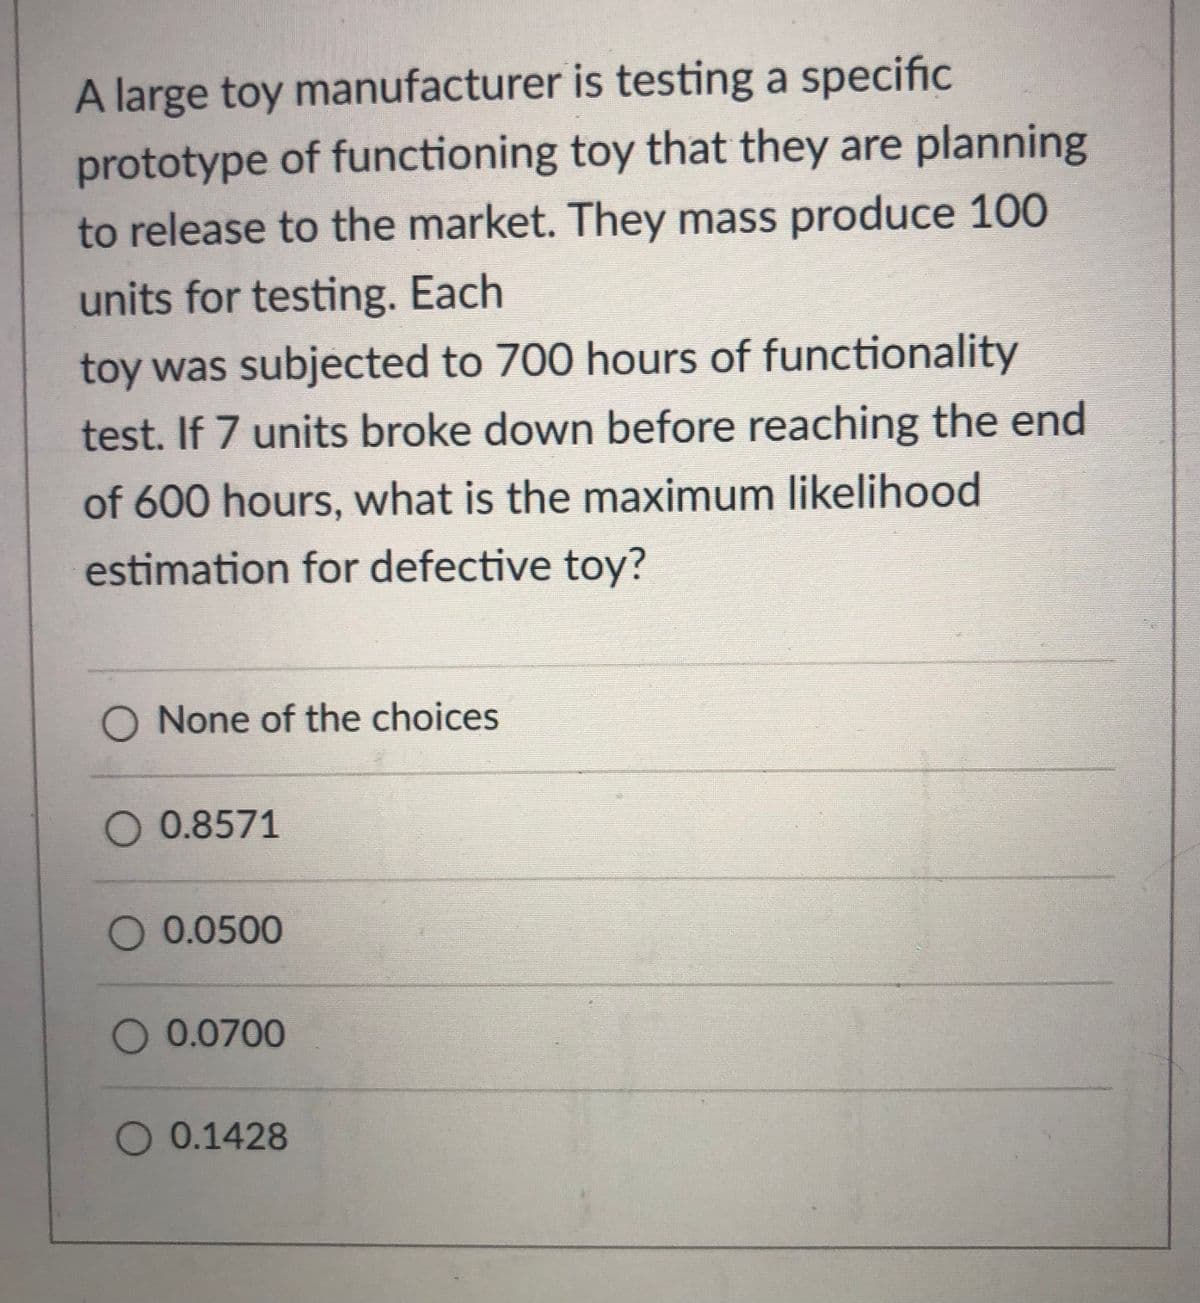 A large toy manufacturer is testing a specific
prototype of functioning toy that they are planning
to release to the market. They mass produce 100
units for testing. Each
toy was subjected to 700 hours of functionality
test. If 7 units broke down before reaching the end
of 600 hours, what is the maximum likelihood
estimation for defective toy?
O None of the choices
O 0.8571
O 0.0500
O 0.0700
O 0.1428
